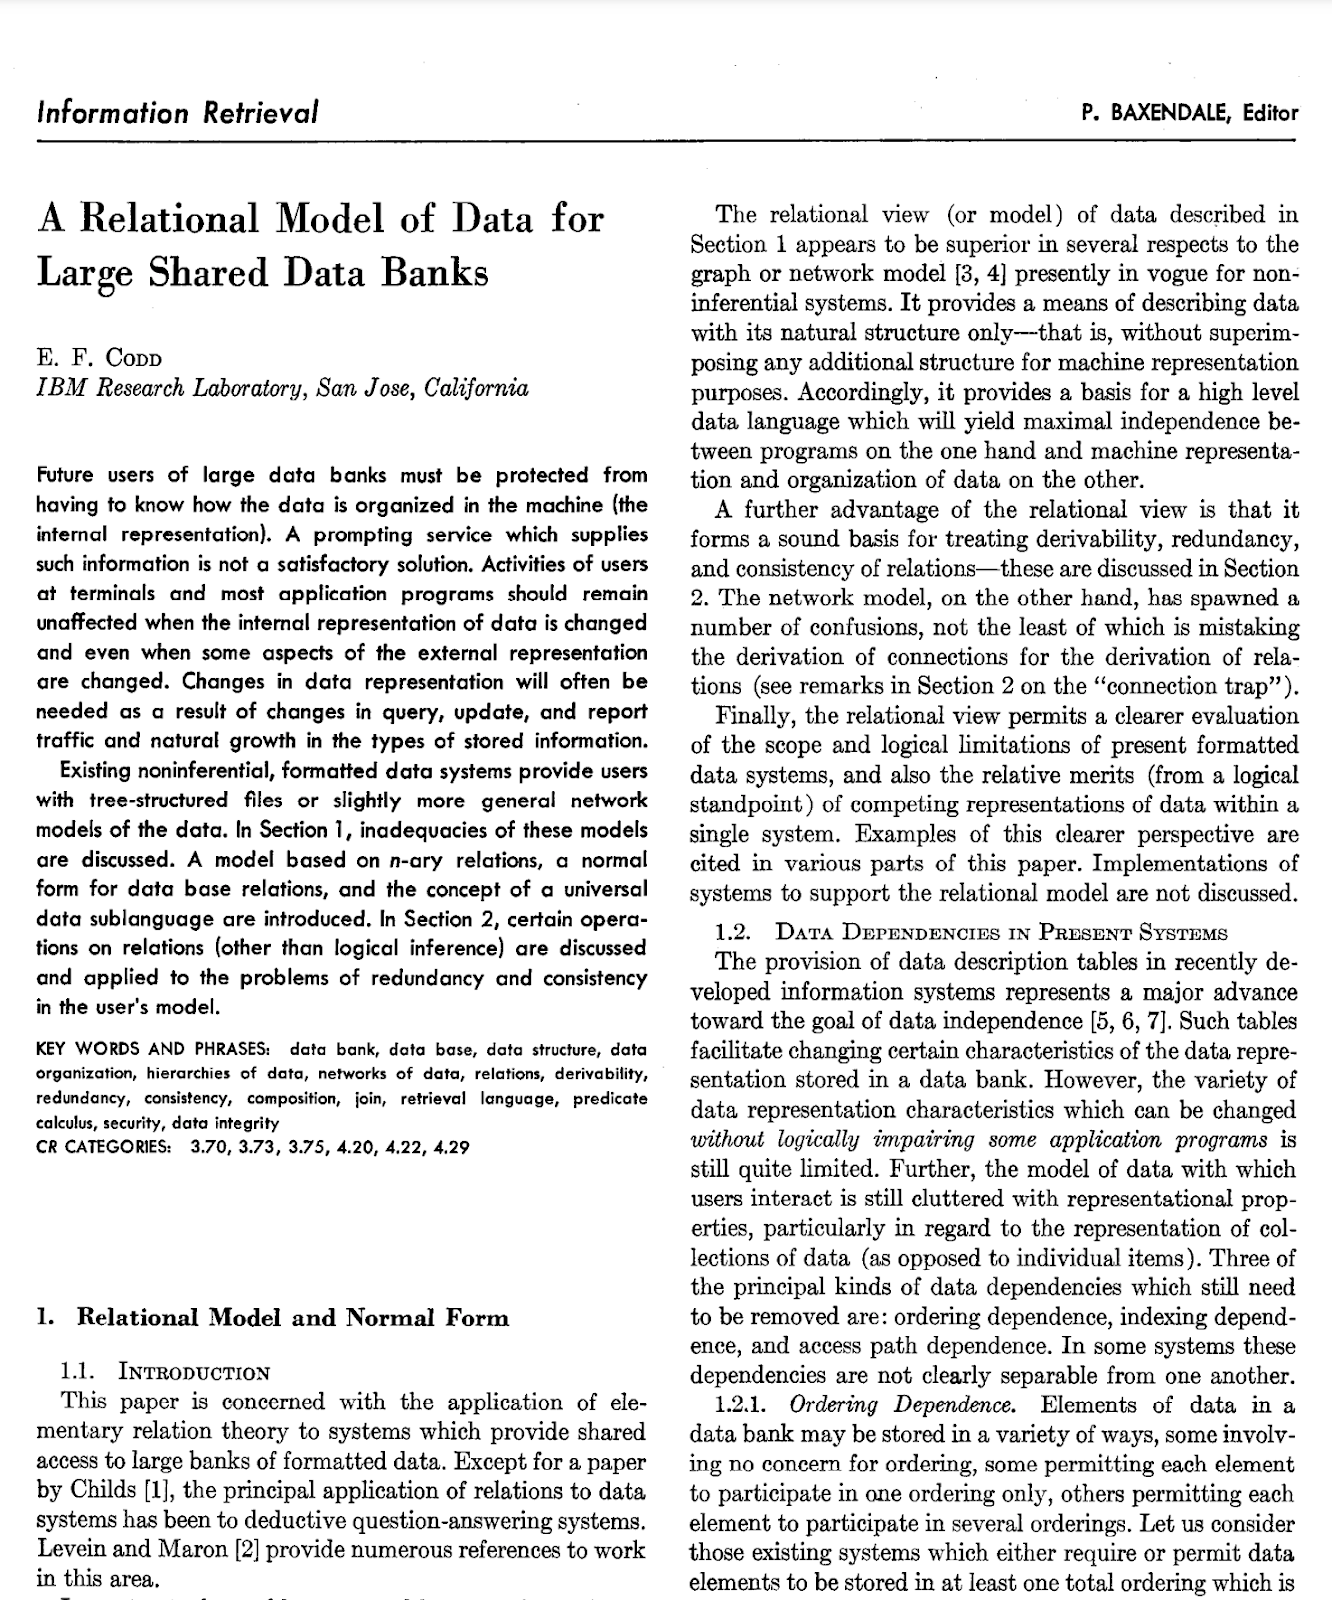 Screenshot of the "A Relational Model of Data for Large Shared Data Banks" newspaper article